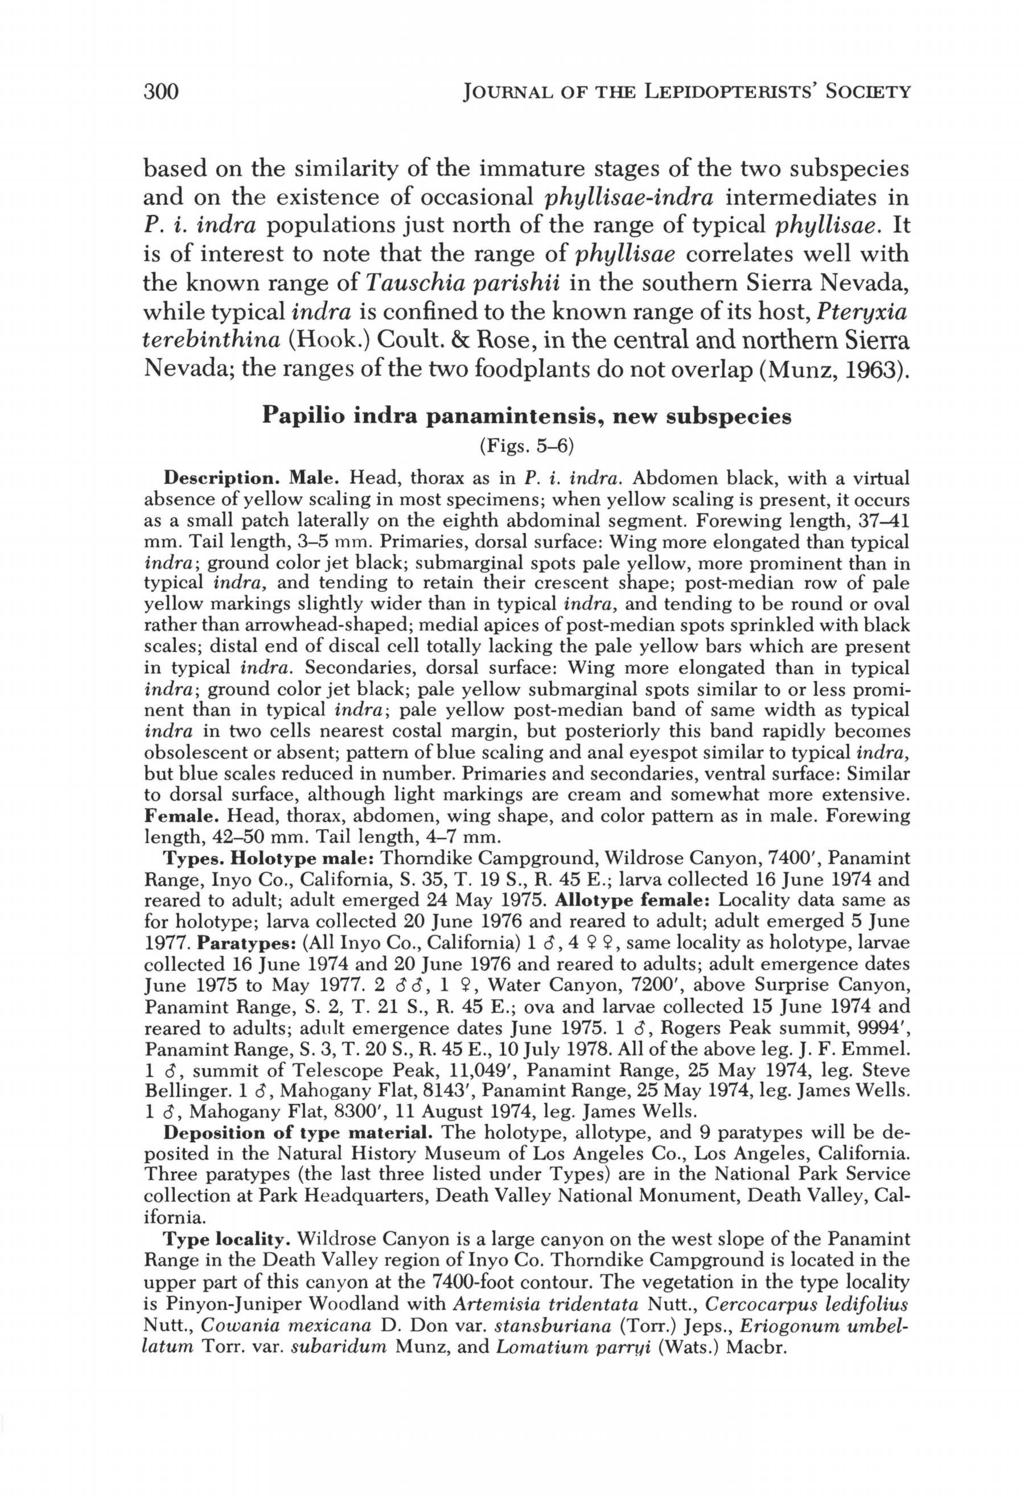 300 JOURNAL OF THE LEPIDOPTERISTS' SOCIETY based on the similarity of the immature stages of the two subspecies and on the existence of occasional phyllisae-indra intermediates in P. i. indra populations just north of the range of typical phyllisae.